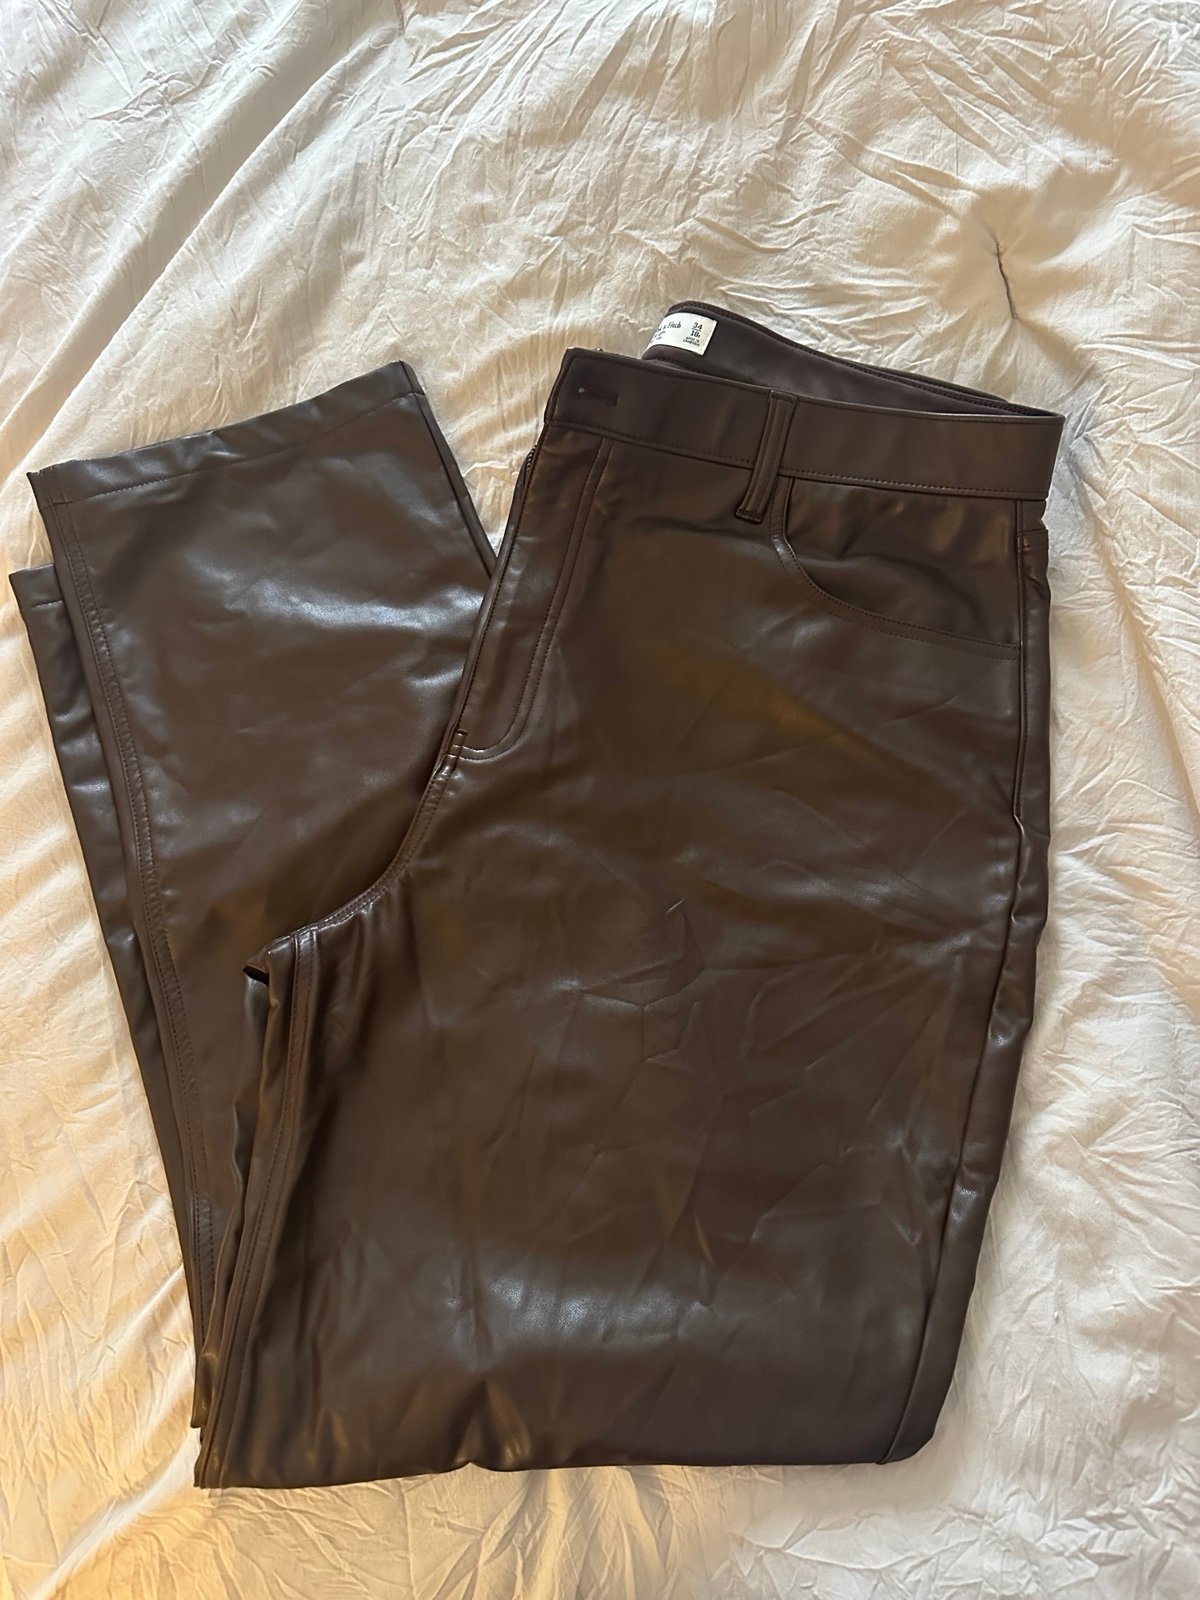 Discounted abercrombie leather pants hhk7p7HRl Outlet Store